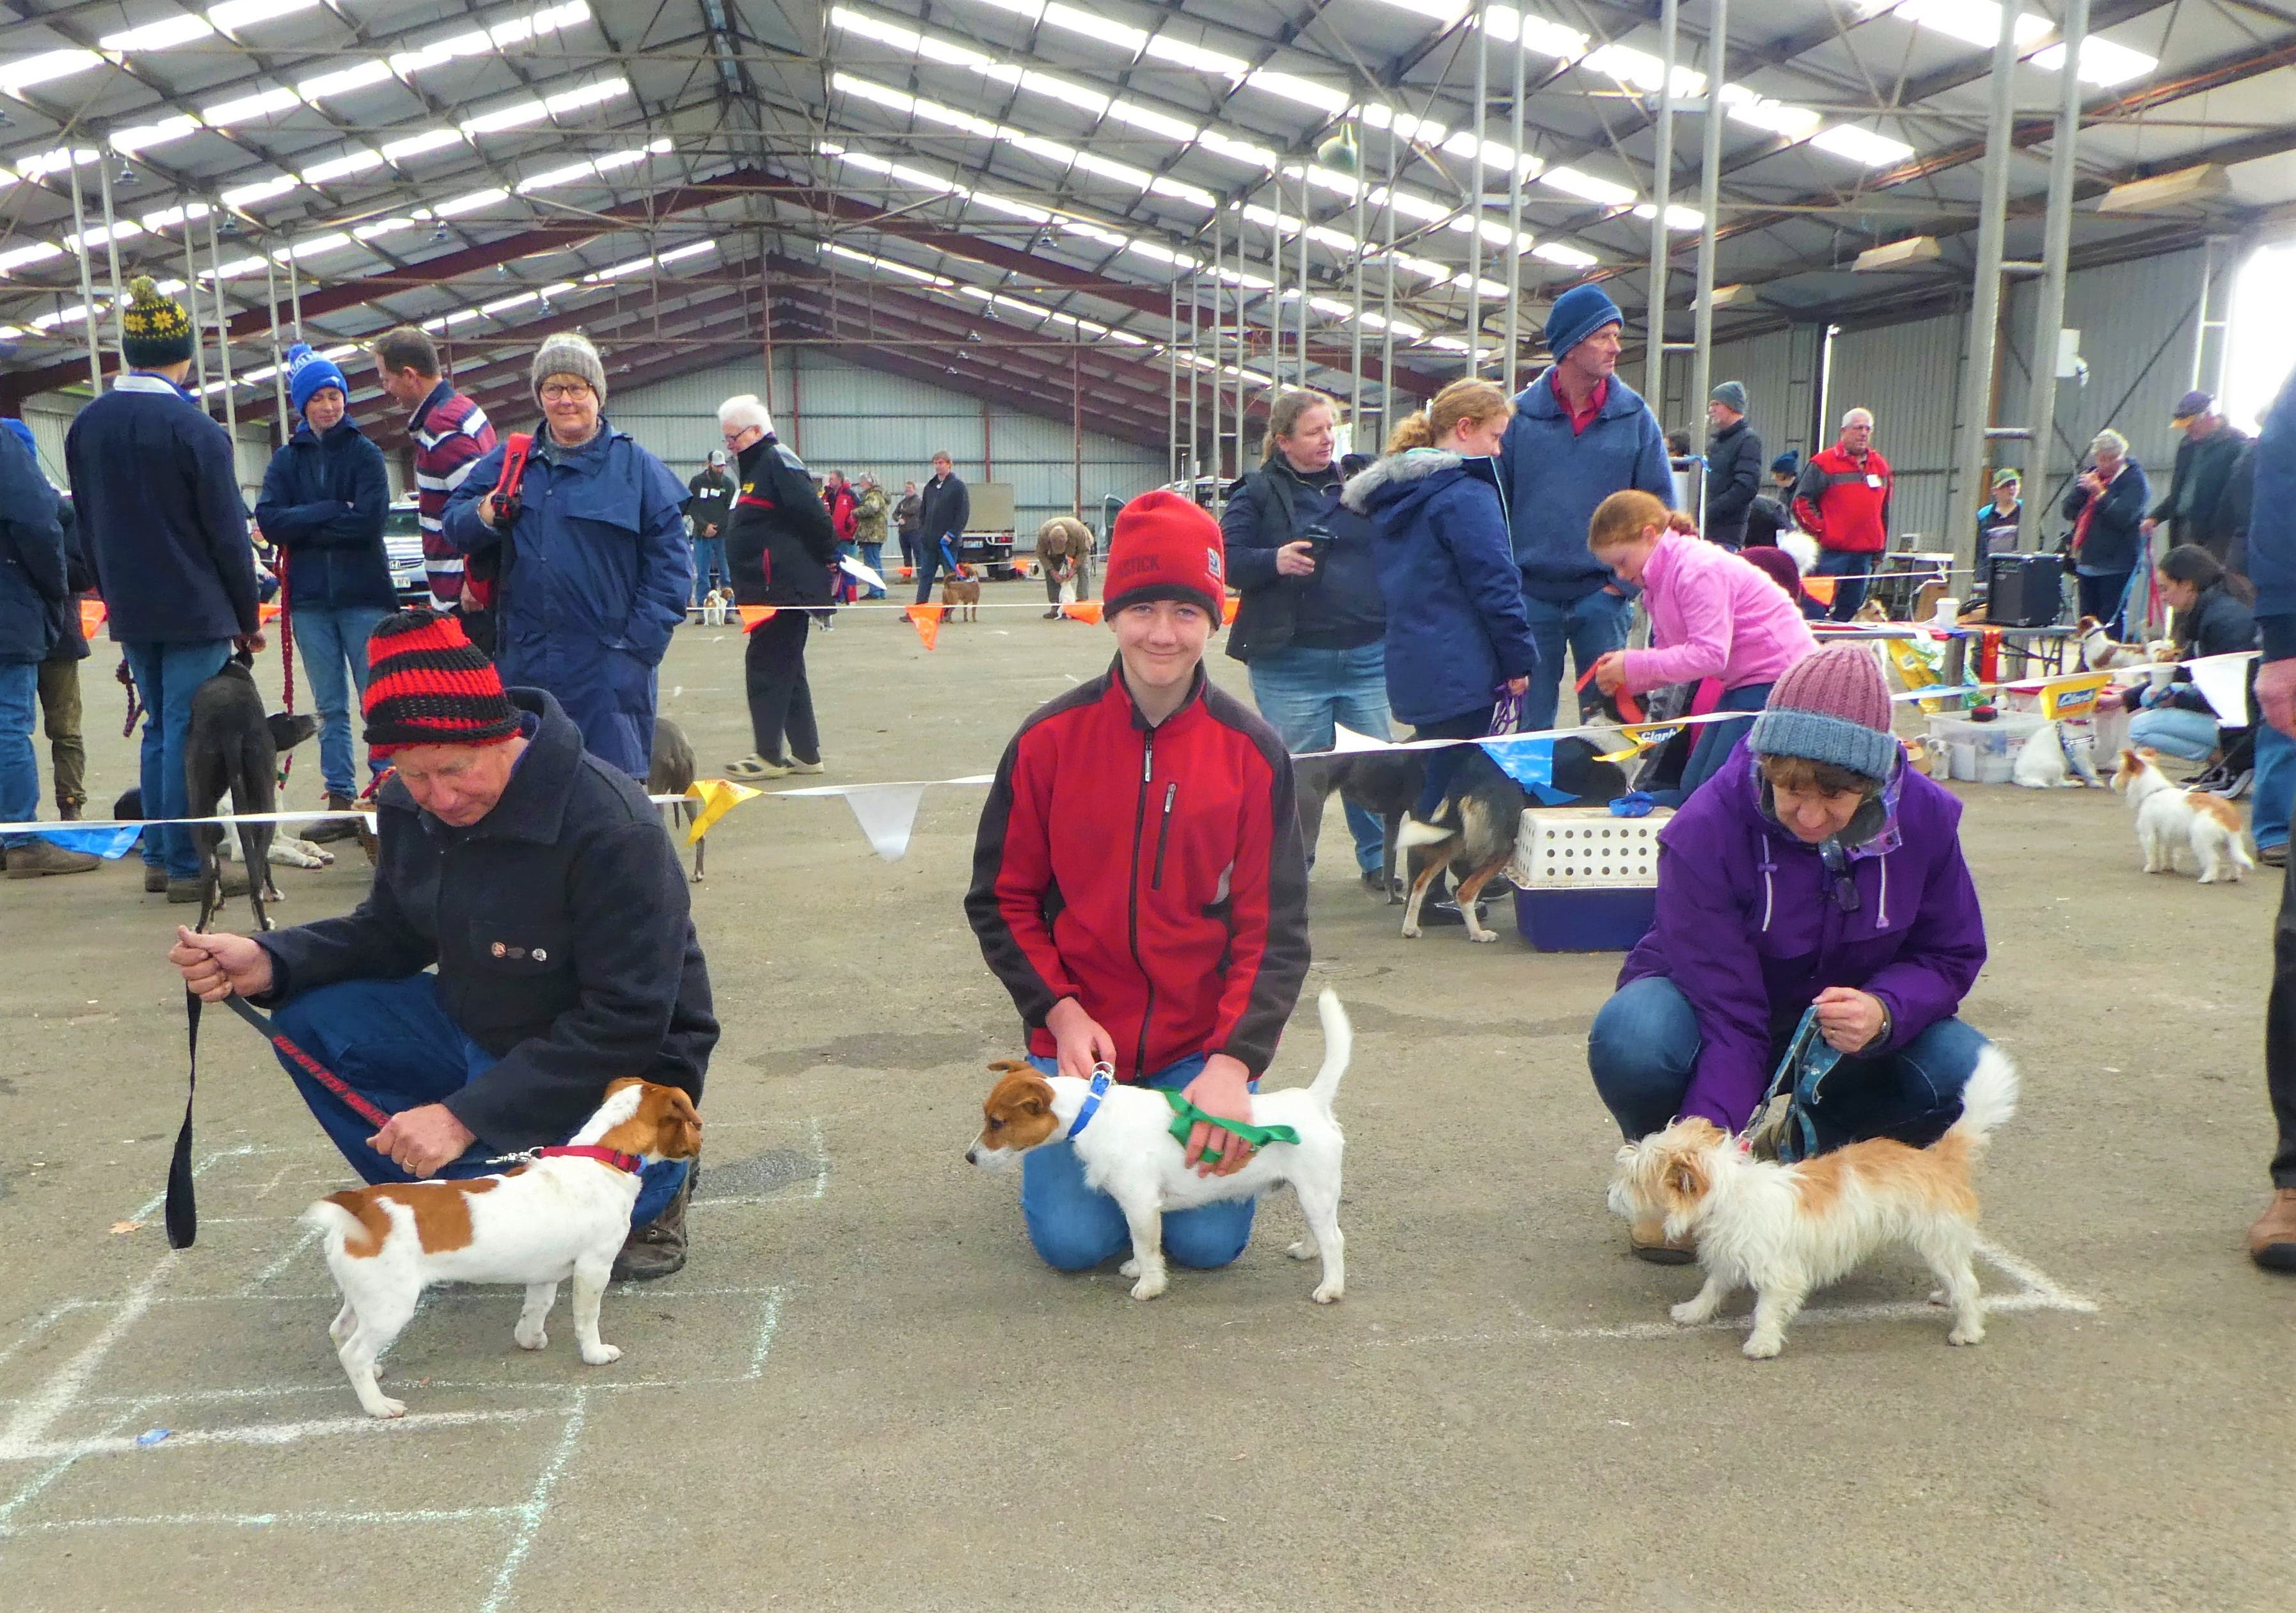 Hamilton Jack Russell Terrier and Hunting Dog Show - Nambucca Heads Accommodation